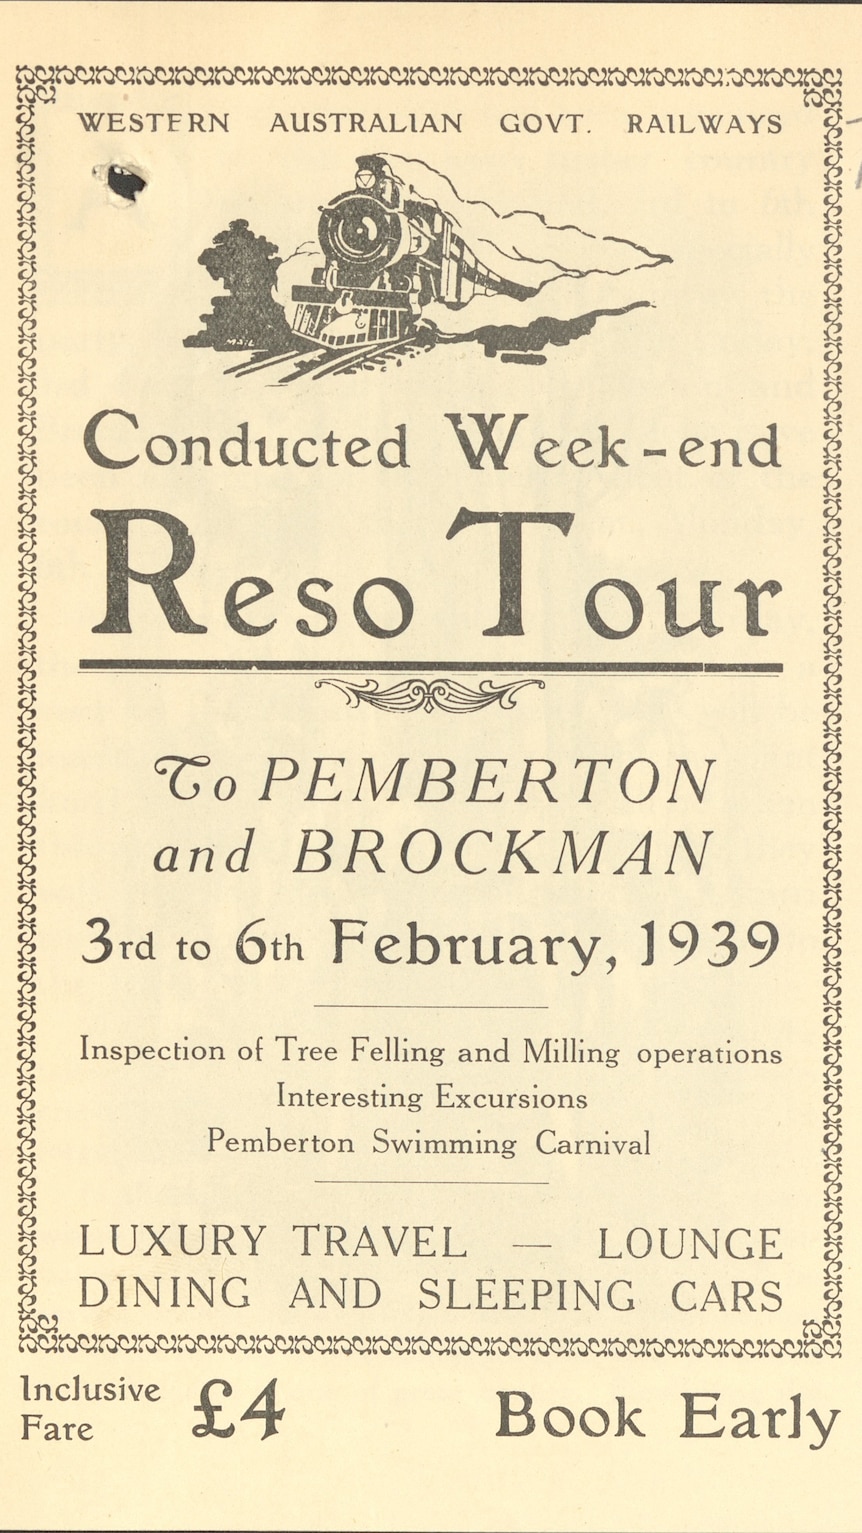 A weekend Reso tour to Pemberton in 1939